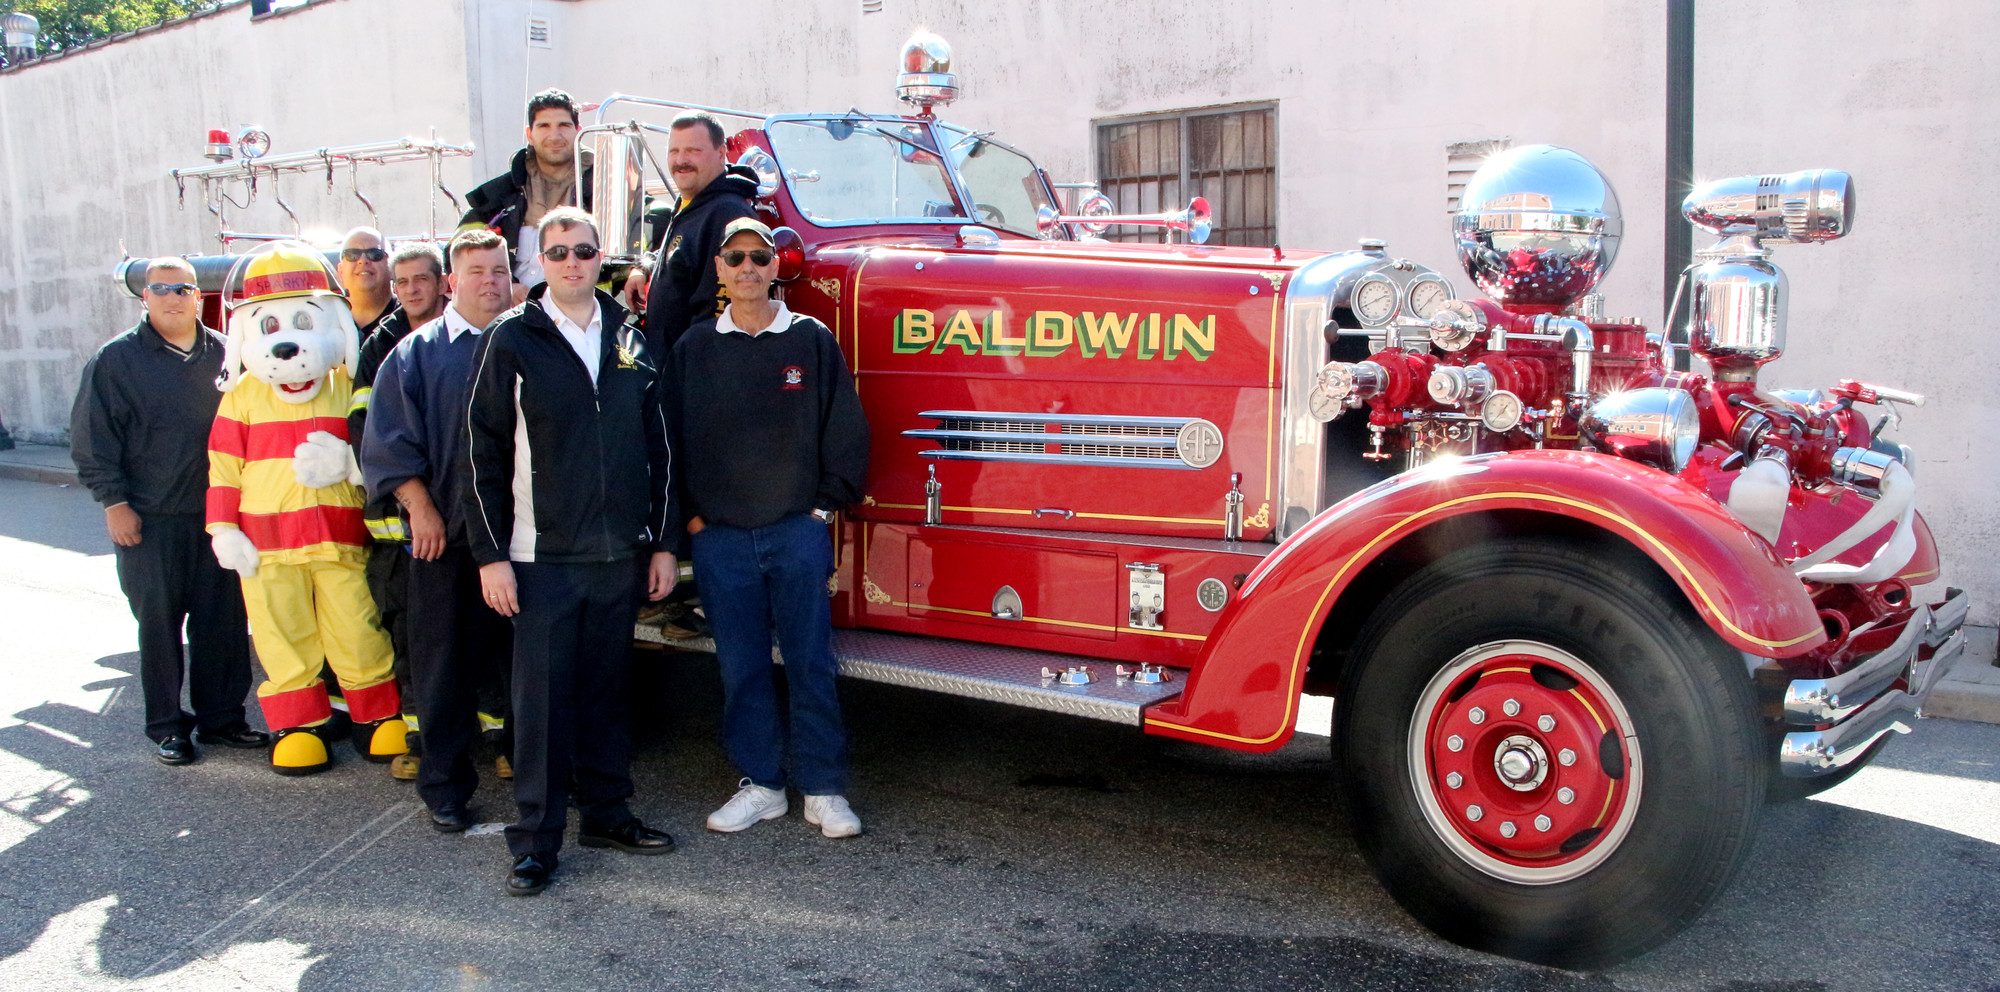 The Baldwin Fire Department hosted a Fire Prevention Open House over the weekend for locals to enjoy. There were demonstrations, fire trucks and a mascot on hand to entertain residents and give them a thing or two to learn.